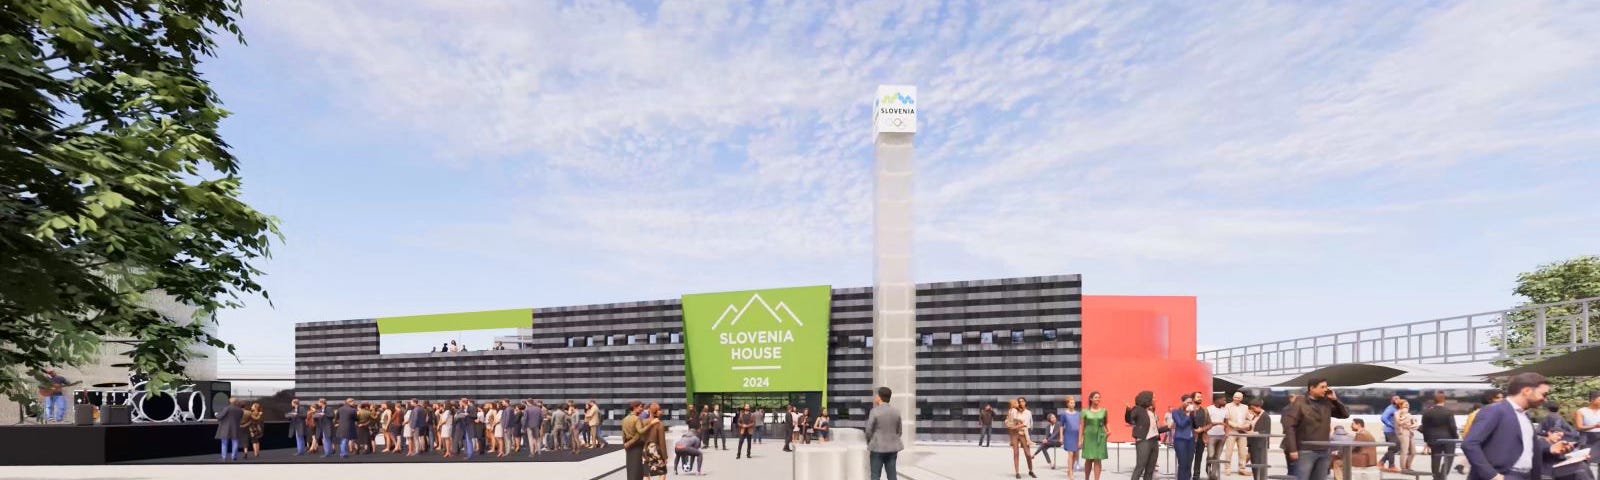 Rendering of the Slovenia House at the Paris 2024 Olympic Summer Games.